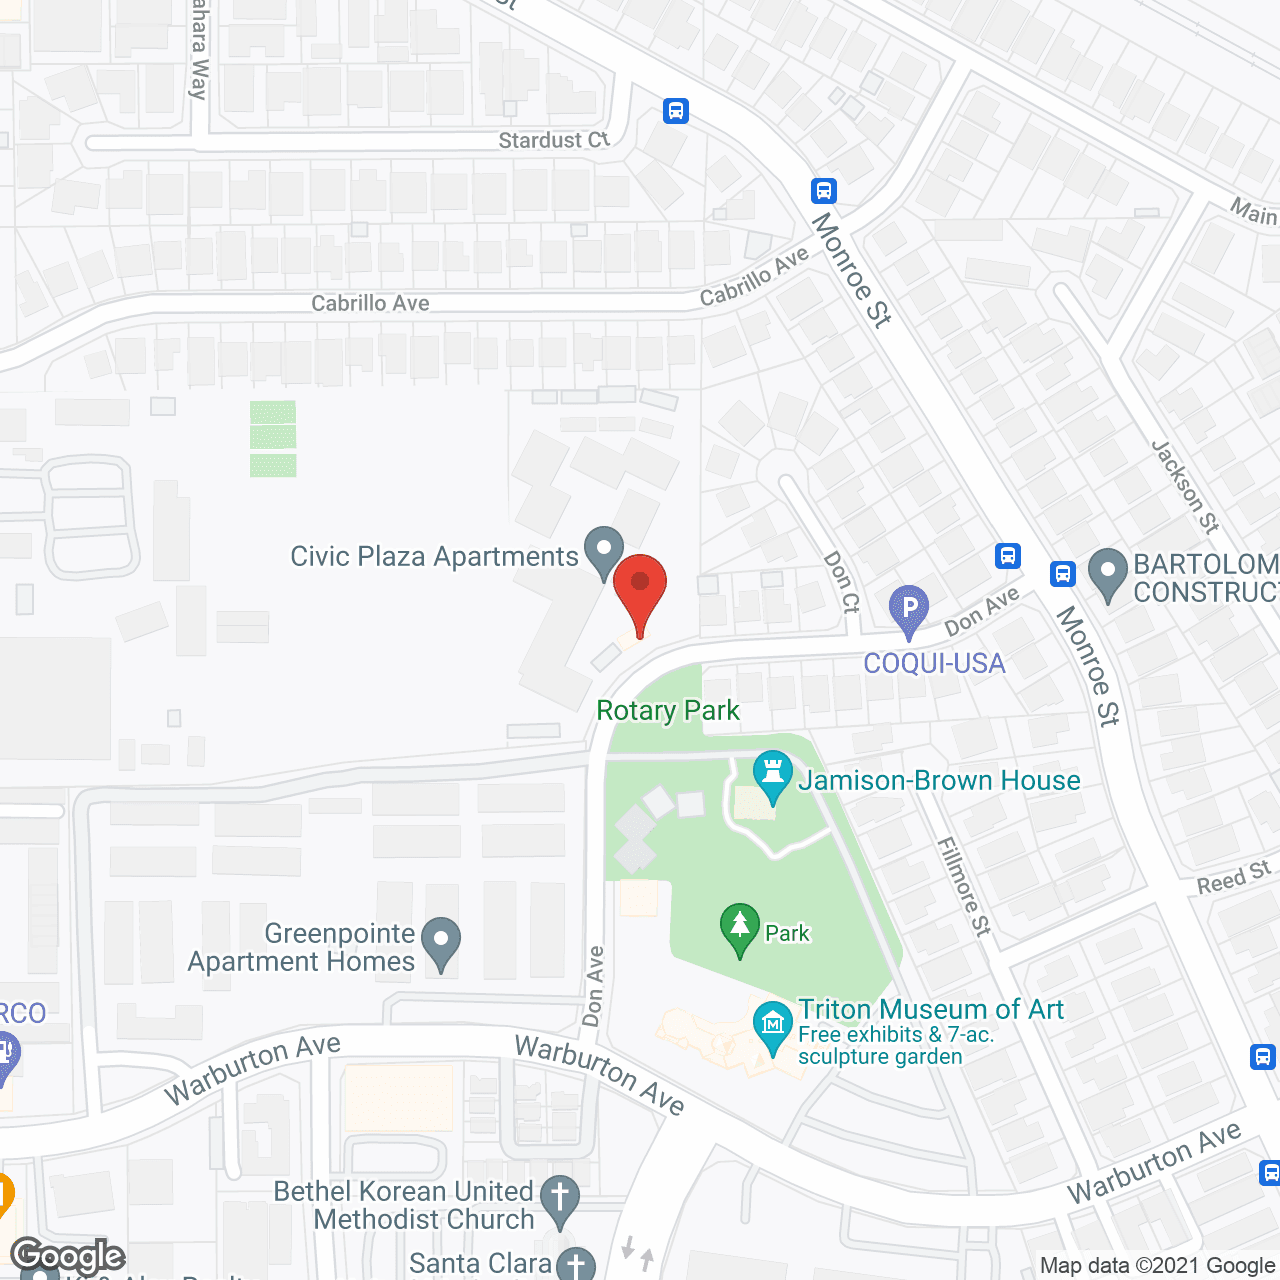 Civic Plaza Apartments in google map